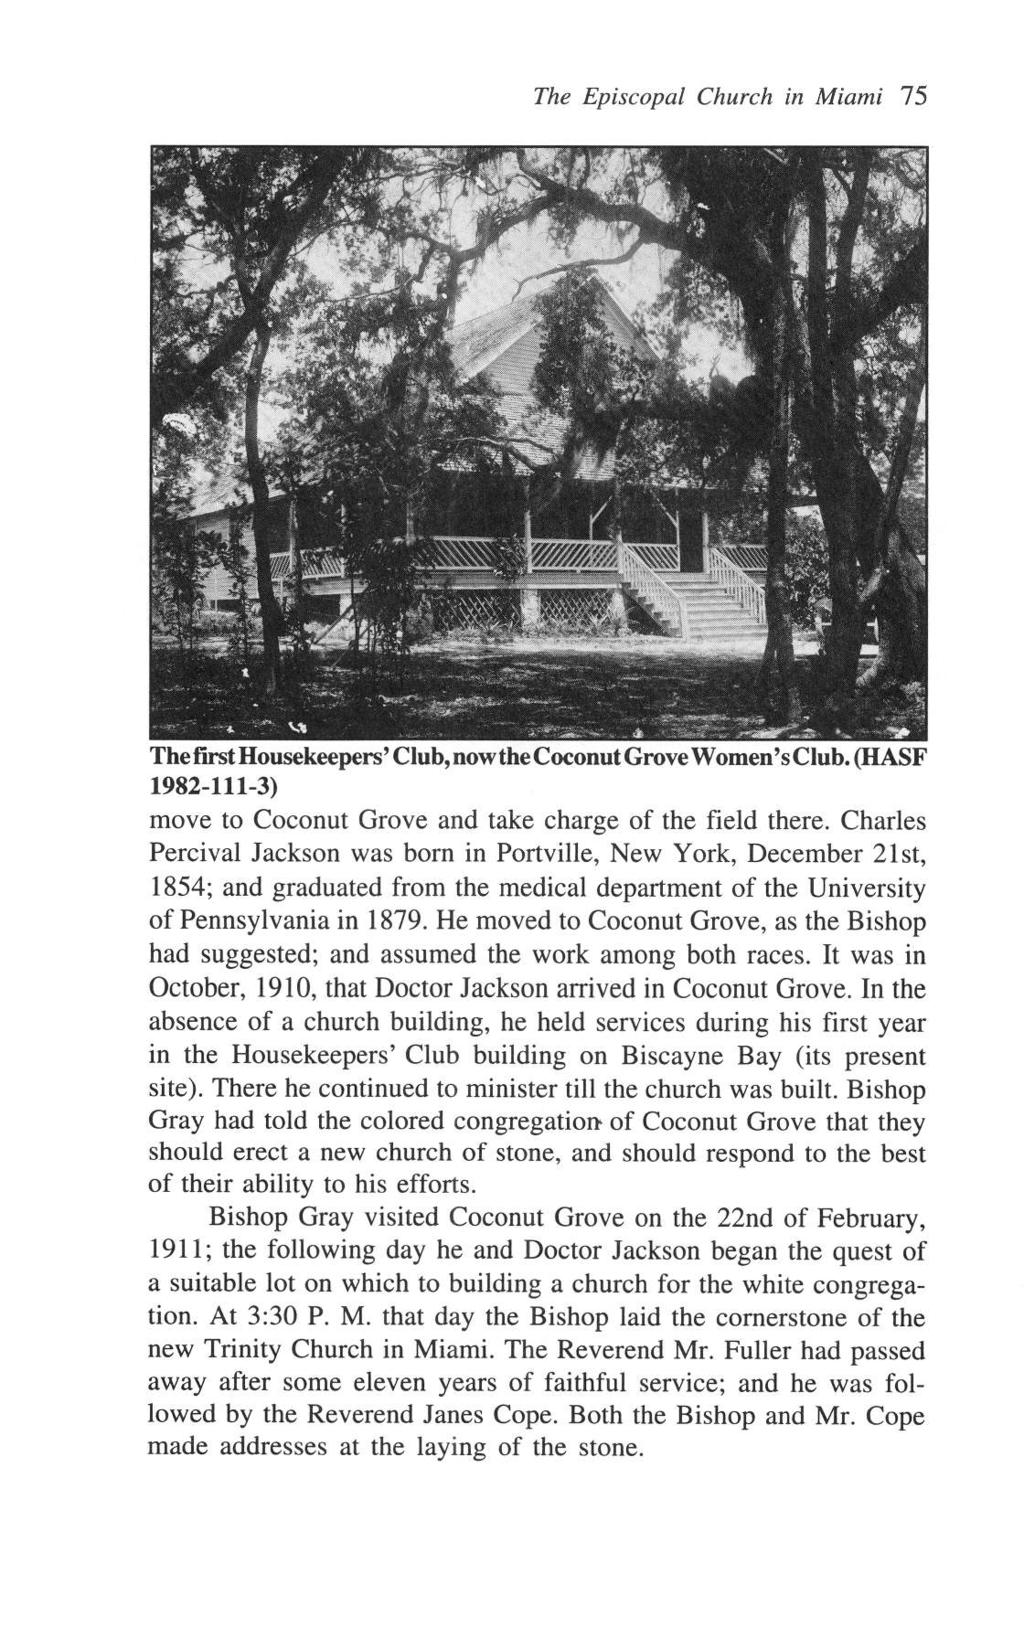 The Episcopal Church in Miami 75 The first Housekeepers' Club, now the Coconut Grove Women's Club. (HASF 1982-111-3) move to Coconut Grove and take charge of the field there.